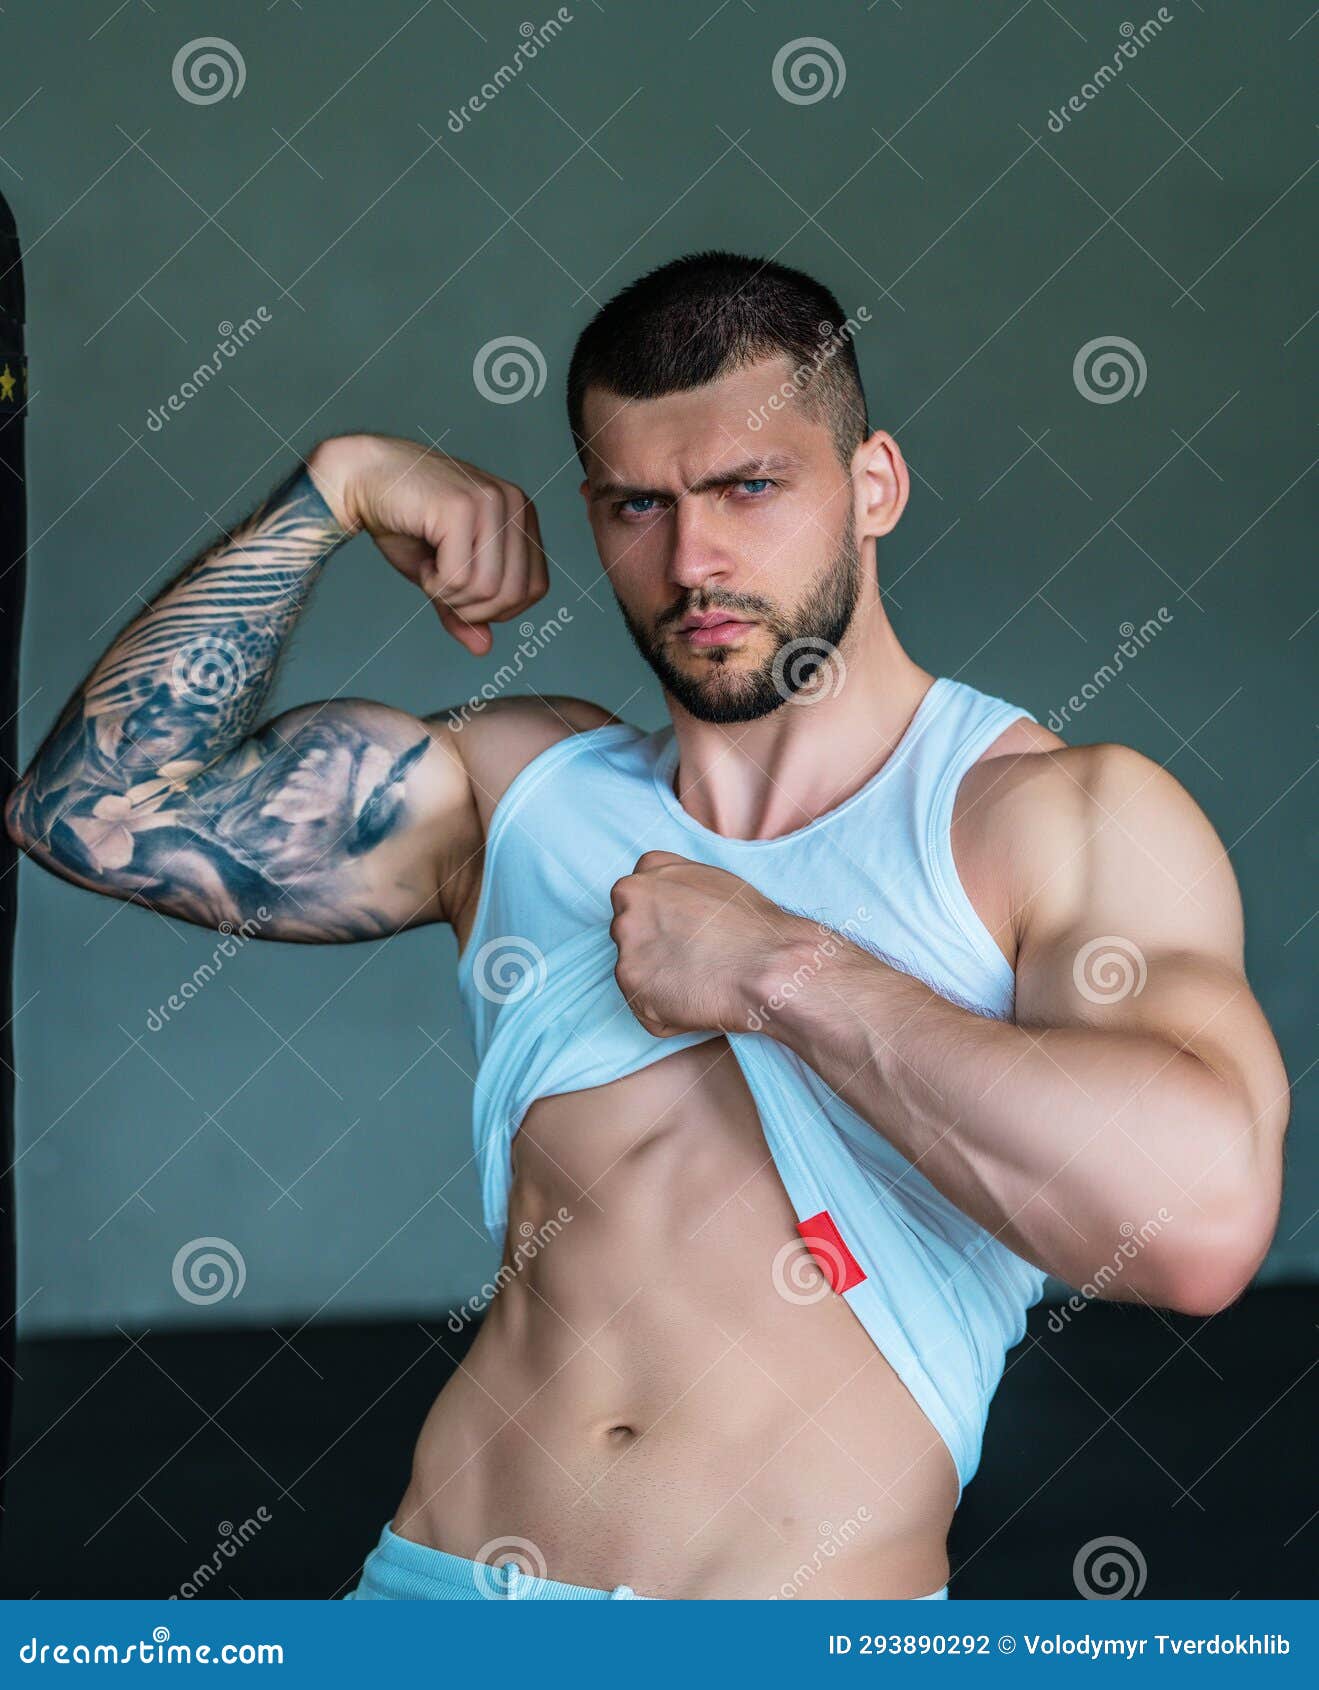 https://thumbs.dreamstime.com/z/sexy-male-muscular-shoulder-chest-sexy-shape-fit-sporty-body-sensual-muscular-hunk-showing-chest-muscular-sexy-male-293890292.jpg